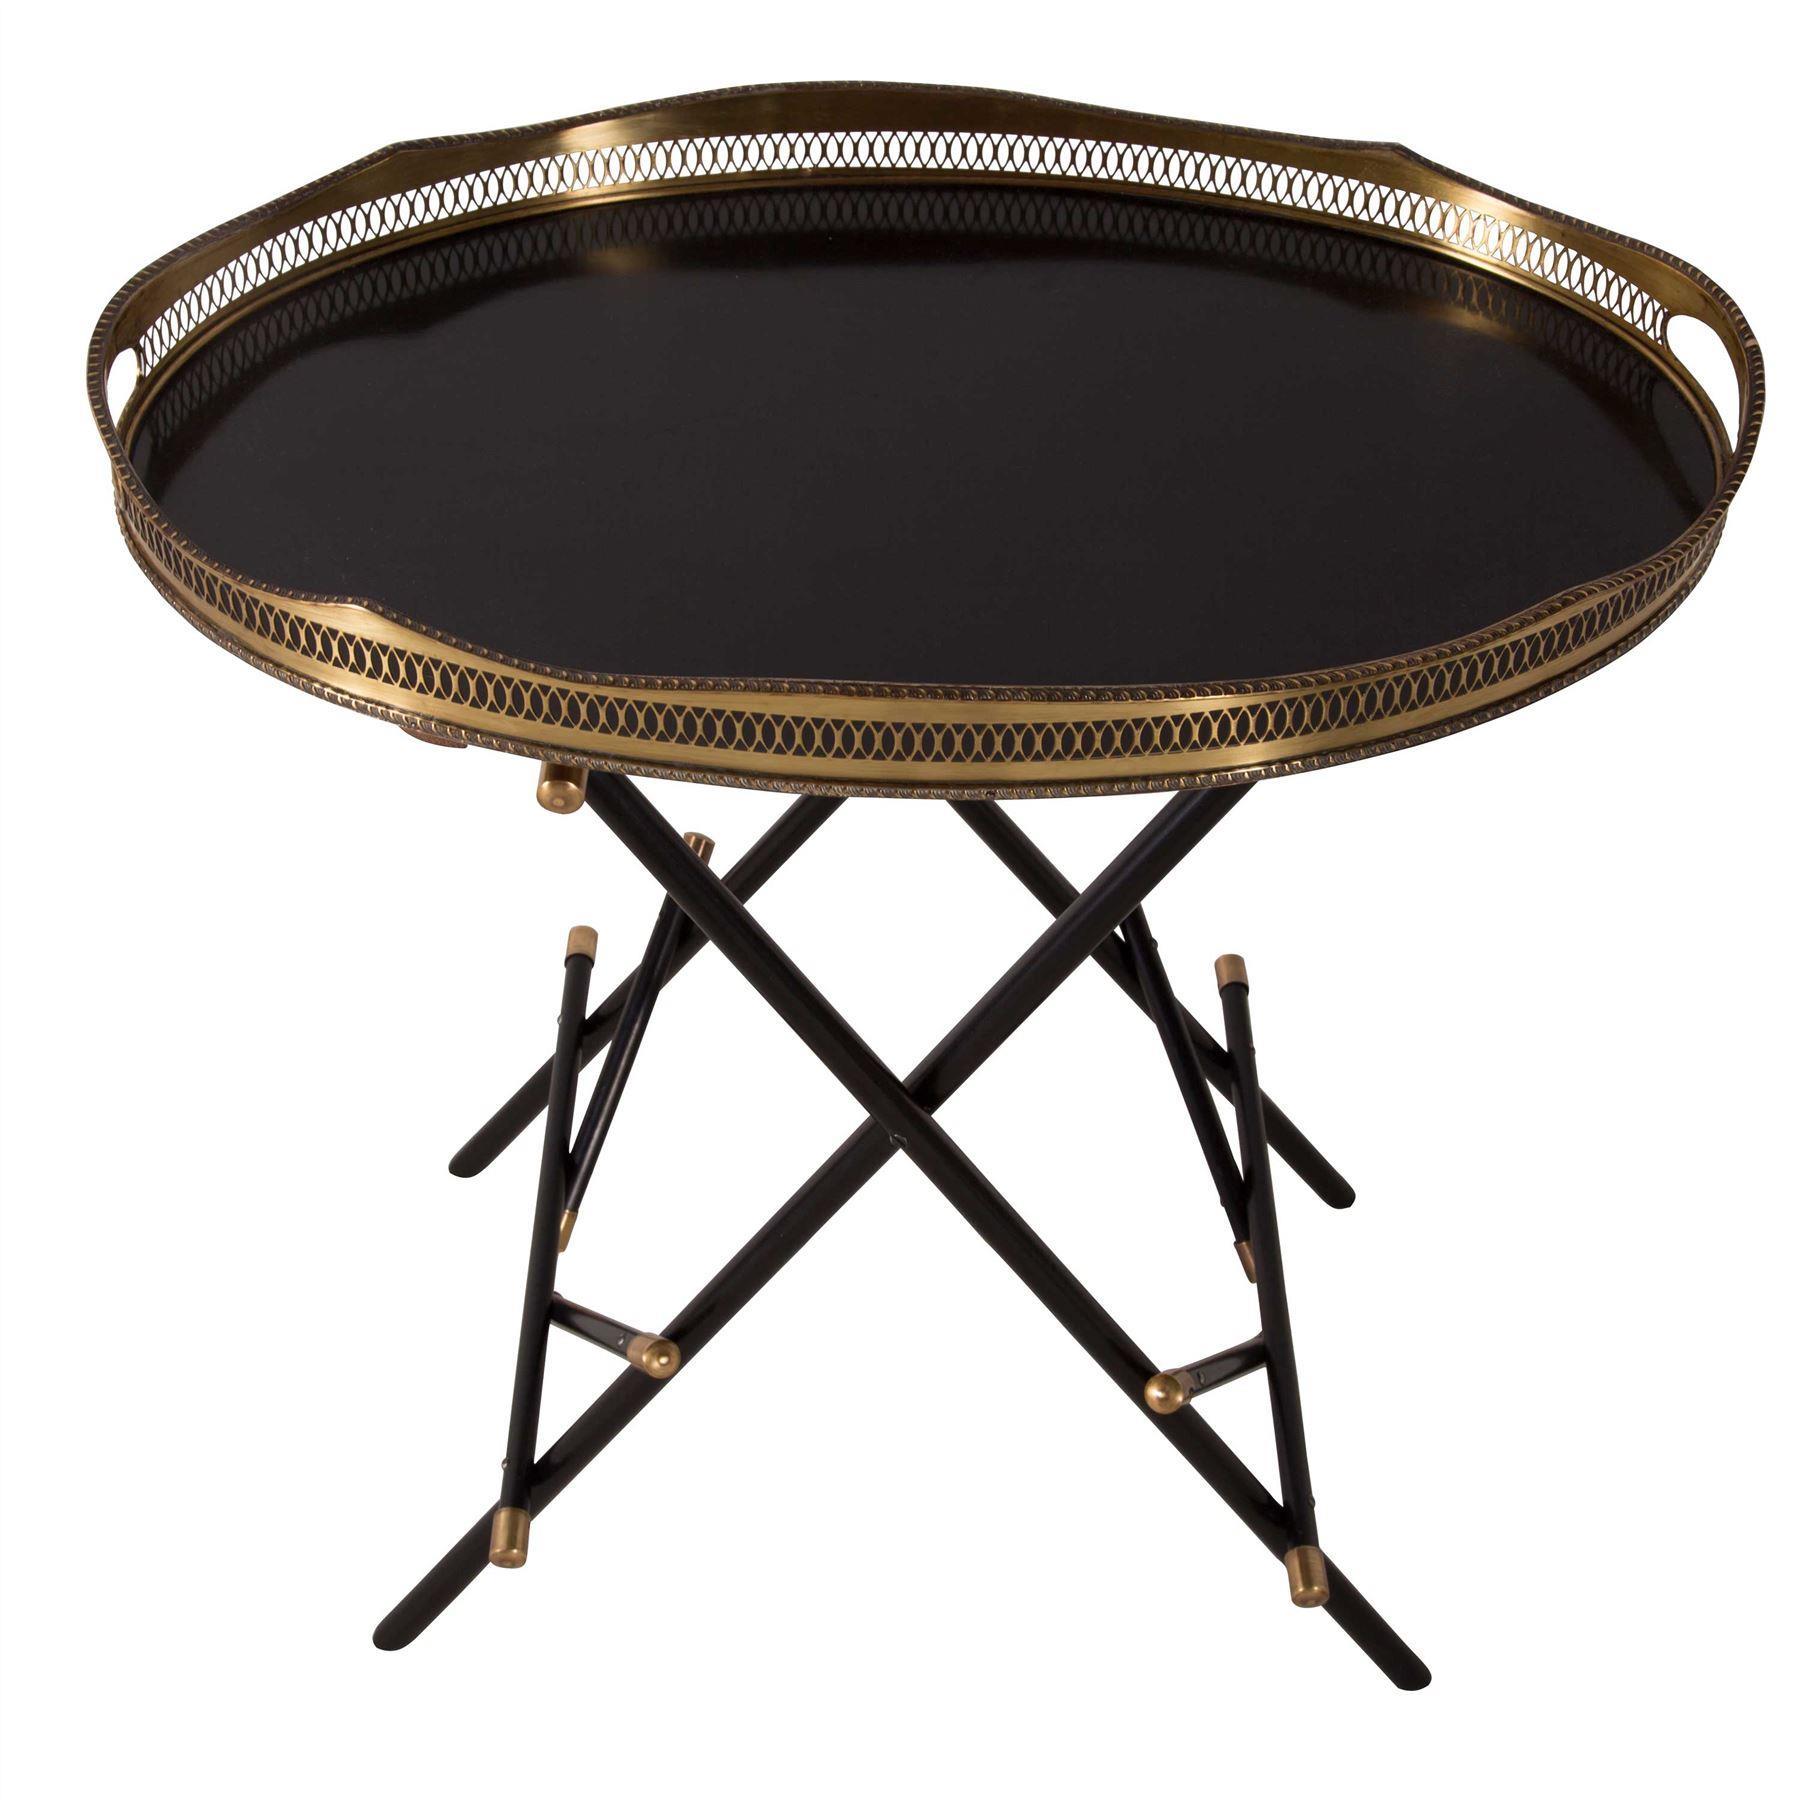 Spanish ebonized and brass butlers tray with a folding base, circa 1920.